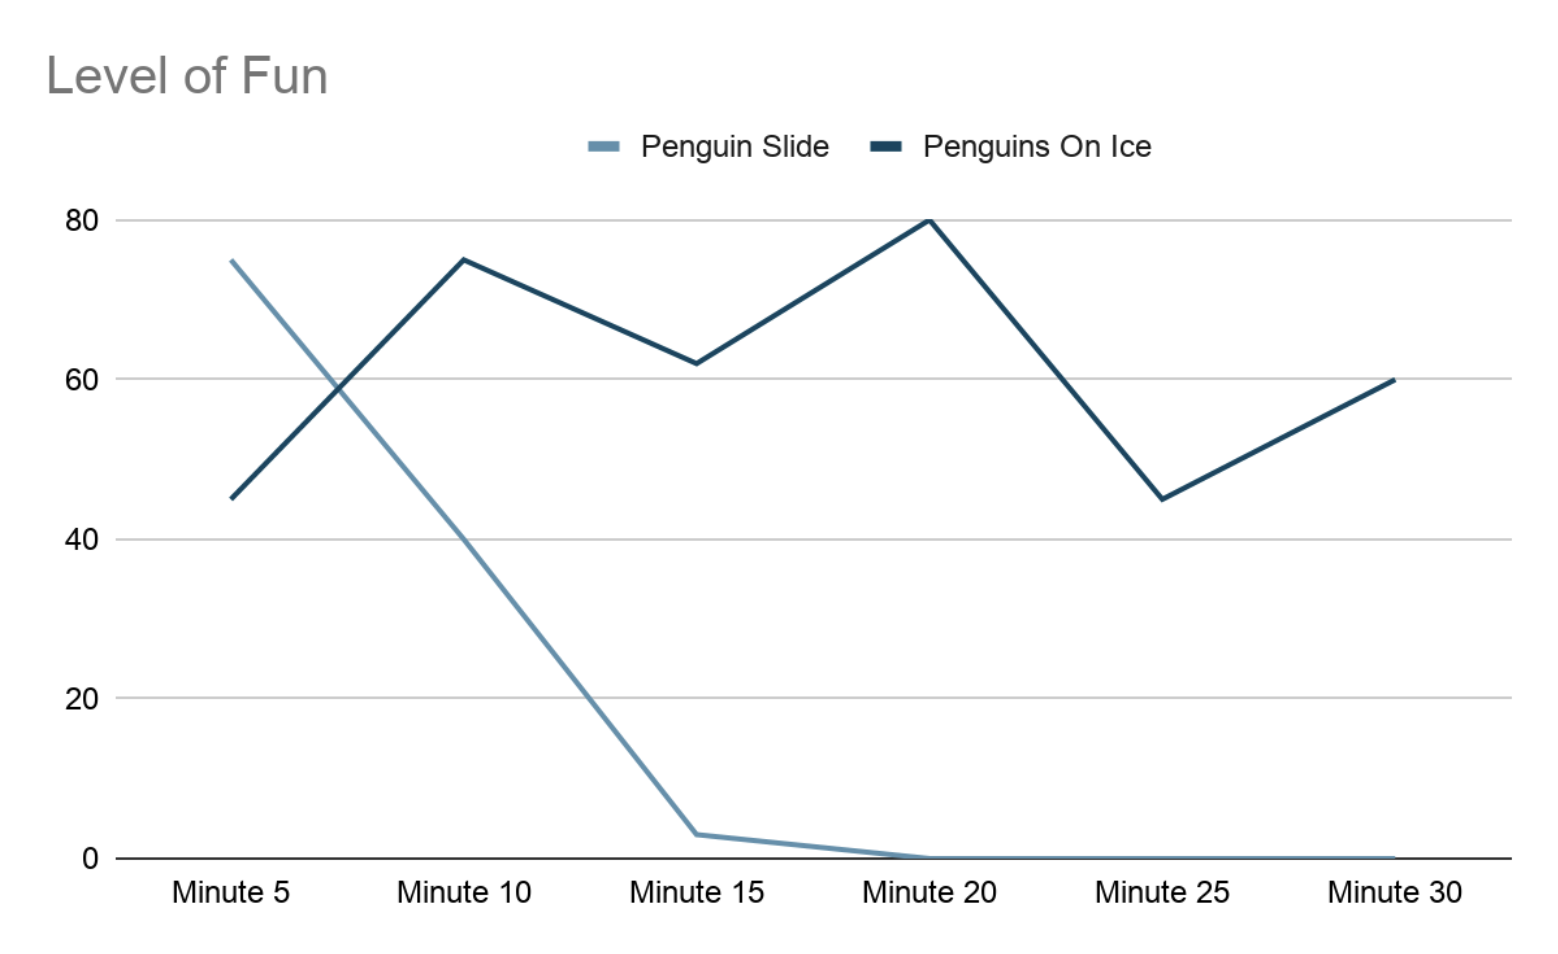 play value chart comparing two penguin games